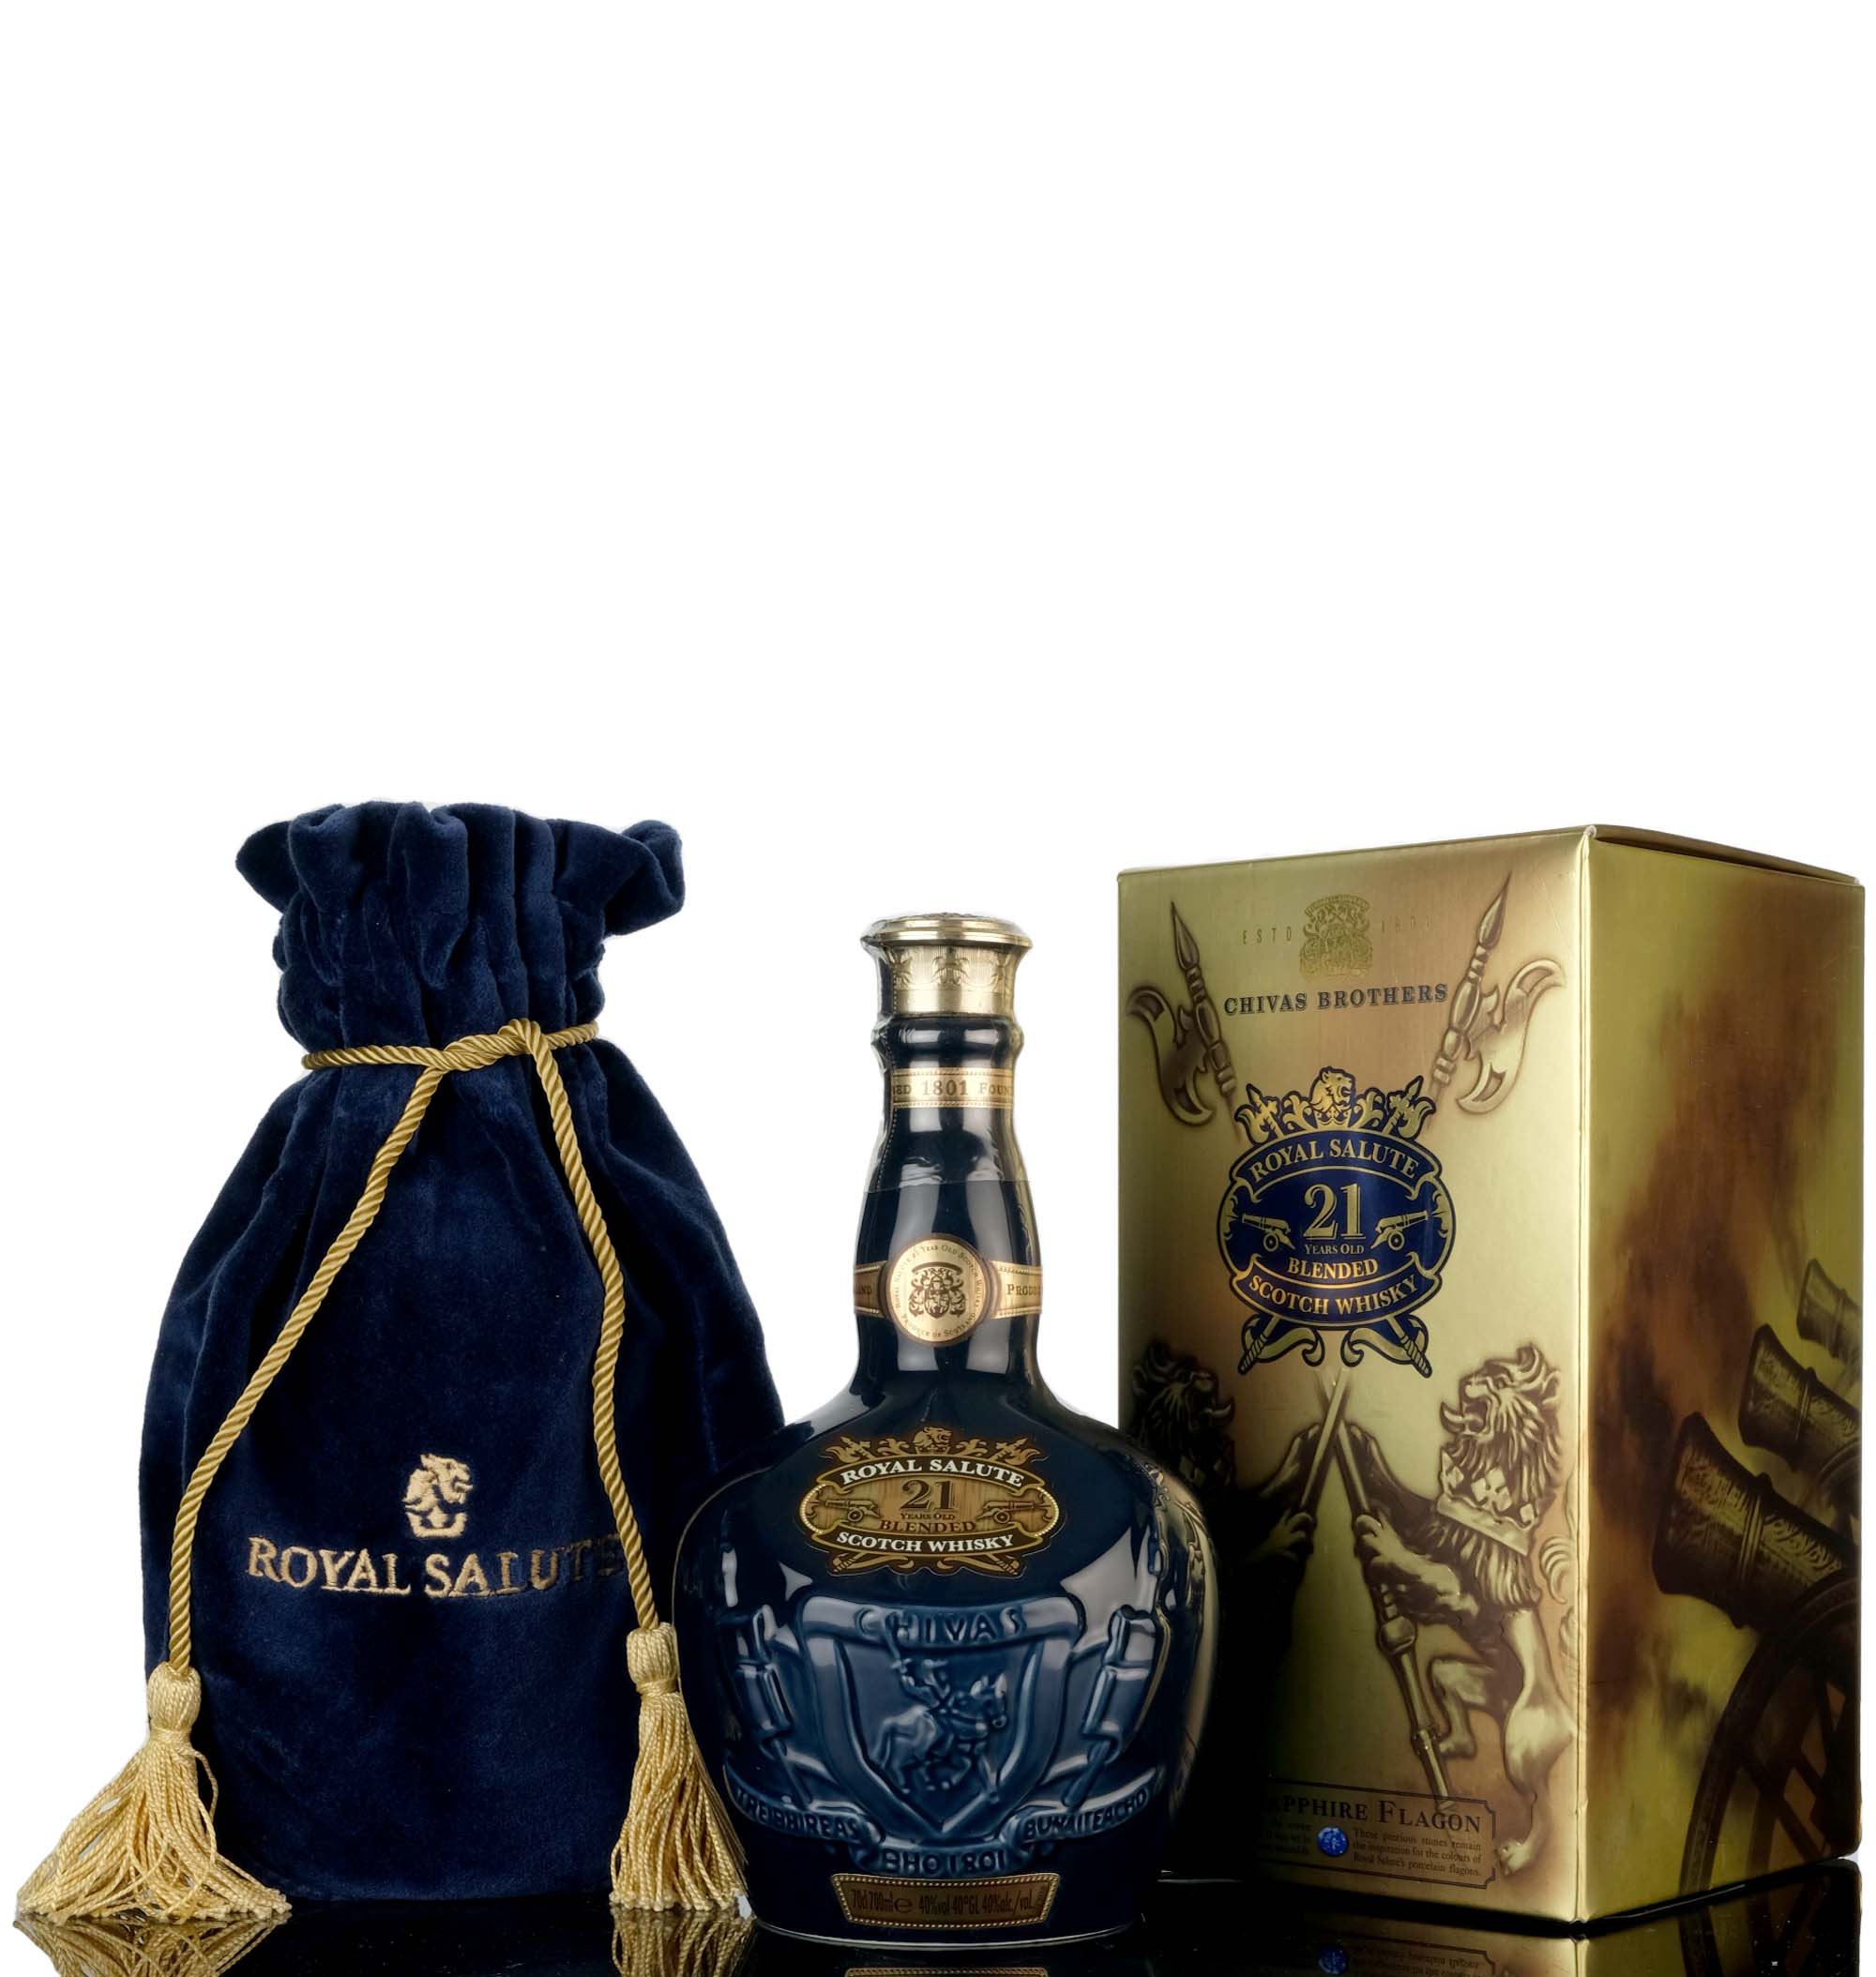 Royal Salute 21 Year Old - Sapphire Ceramic - 2014 Release